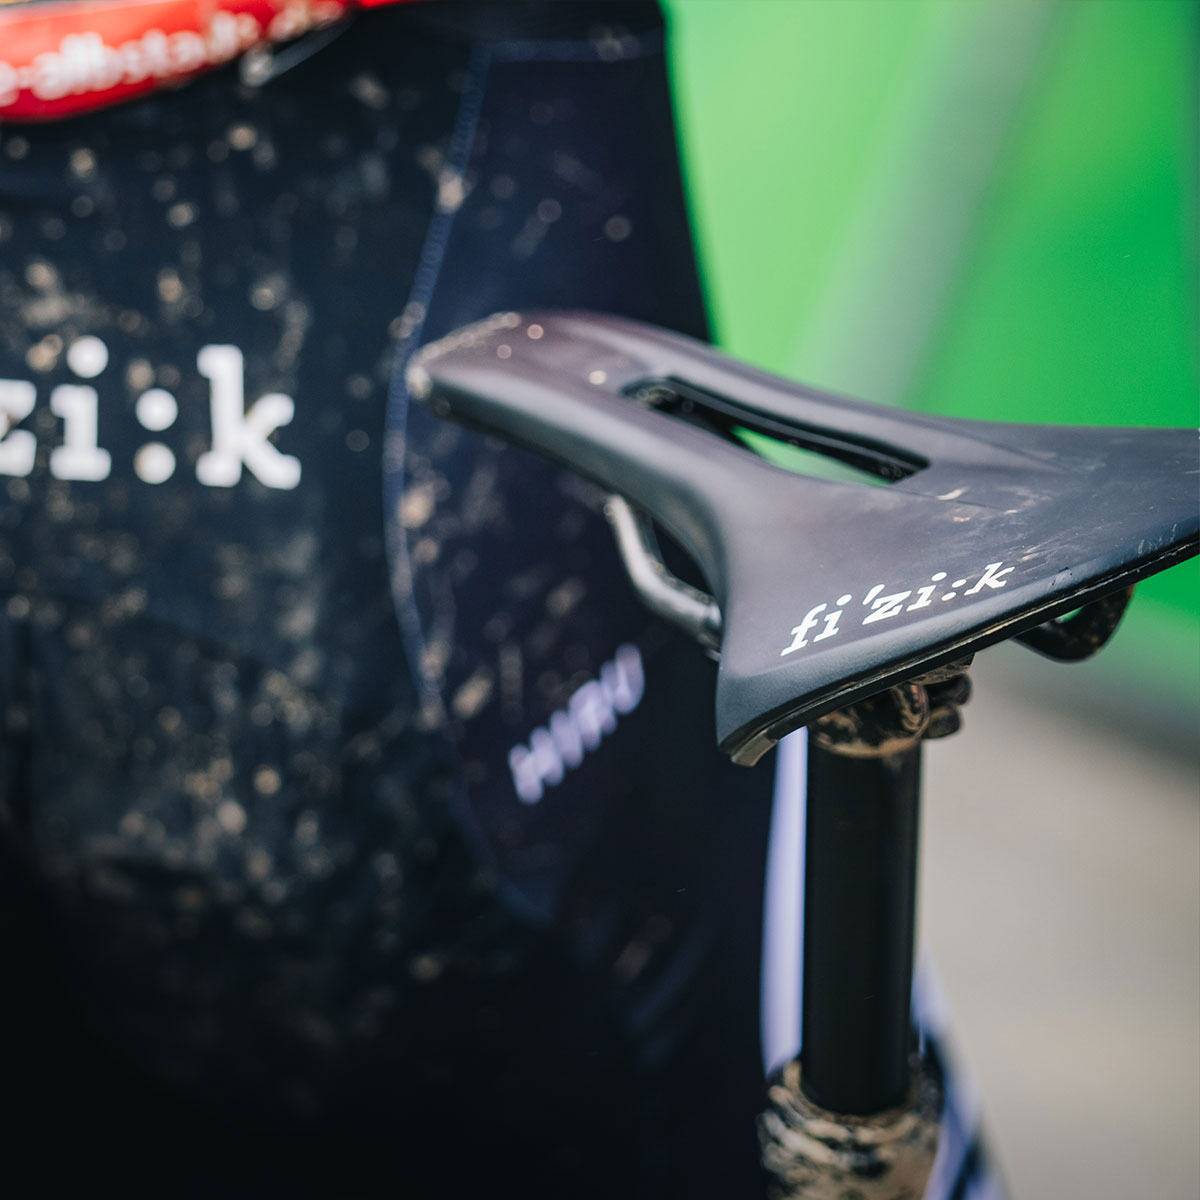 fizik-vento-antares-range-lightweight-saddle-for-cyclocross-and-cross-country-race